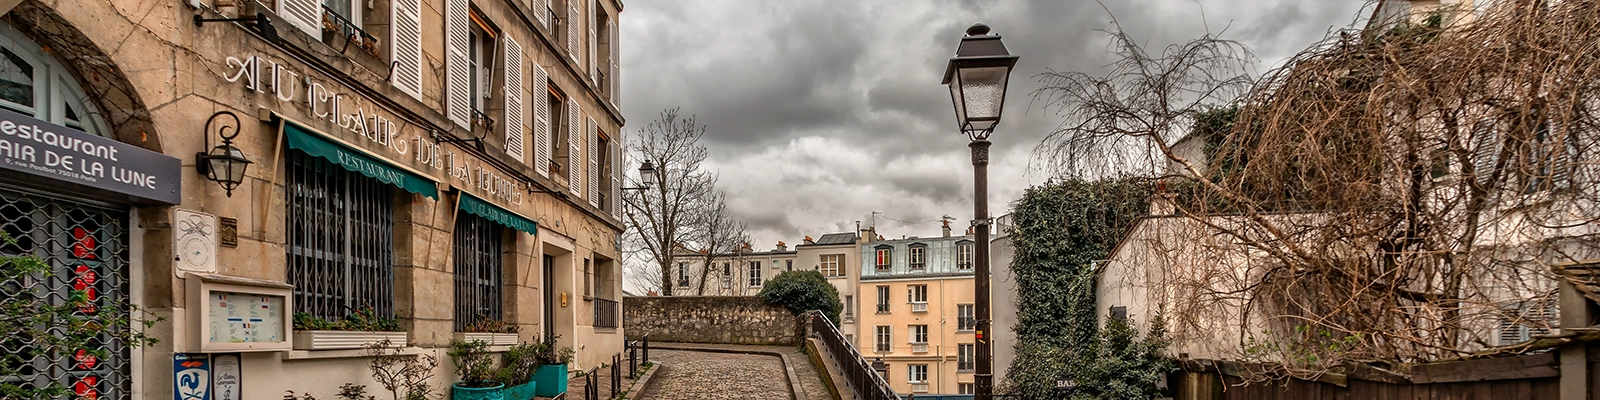 Scenic view of Montmartre, a charming artistic district in Paris